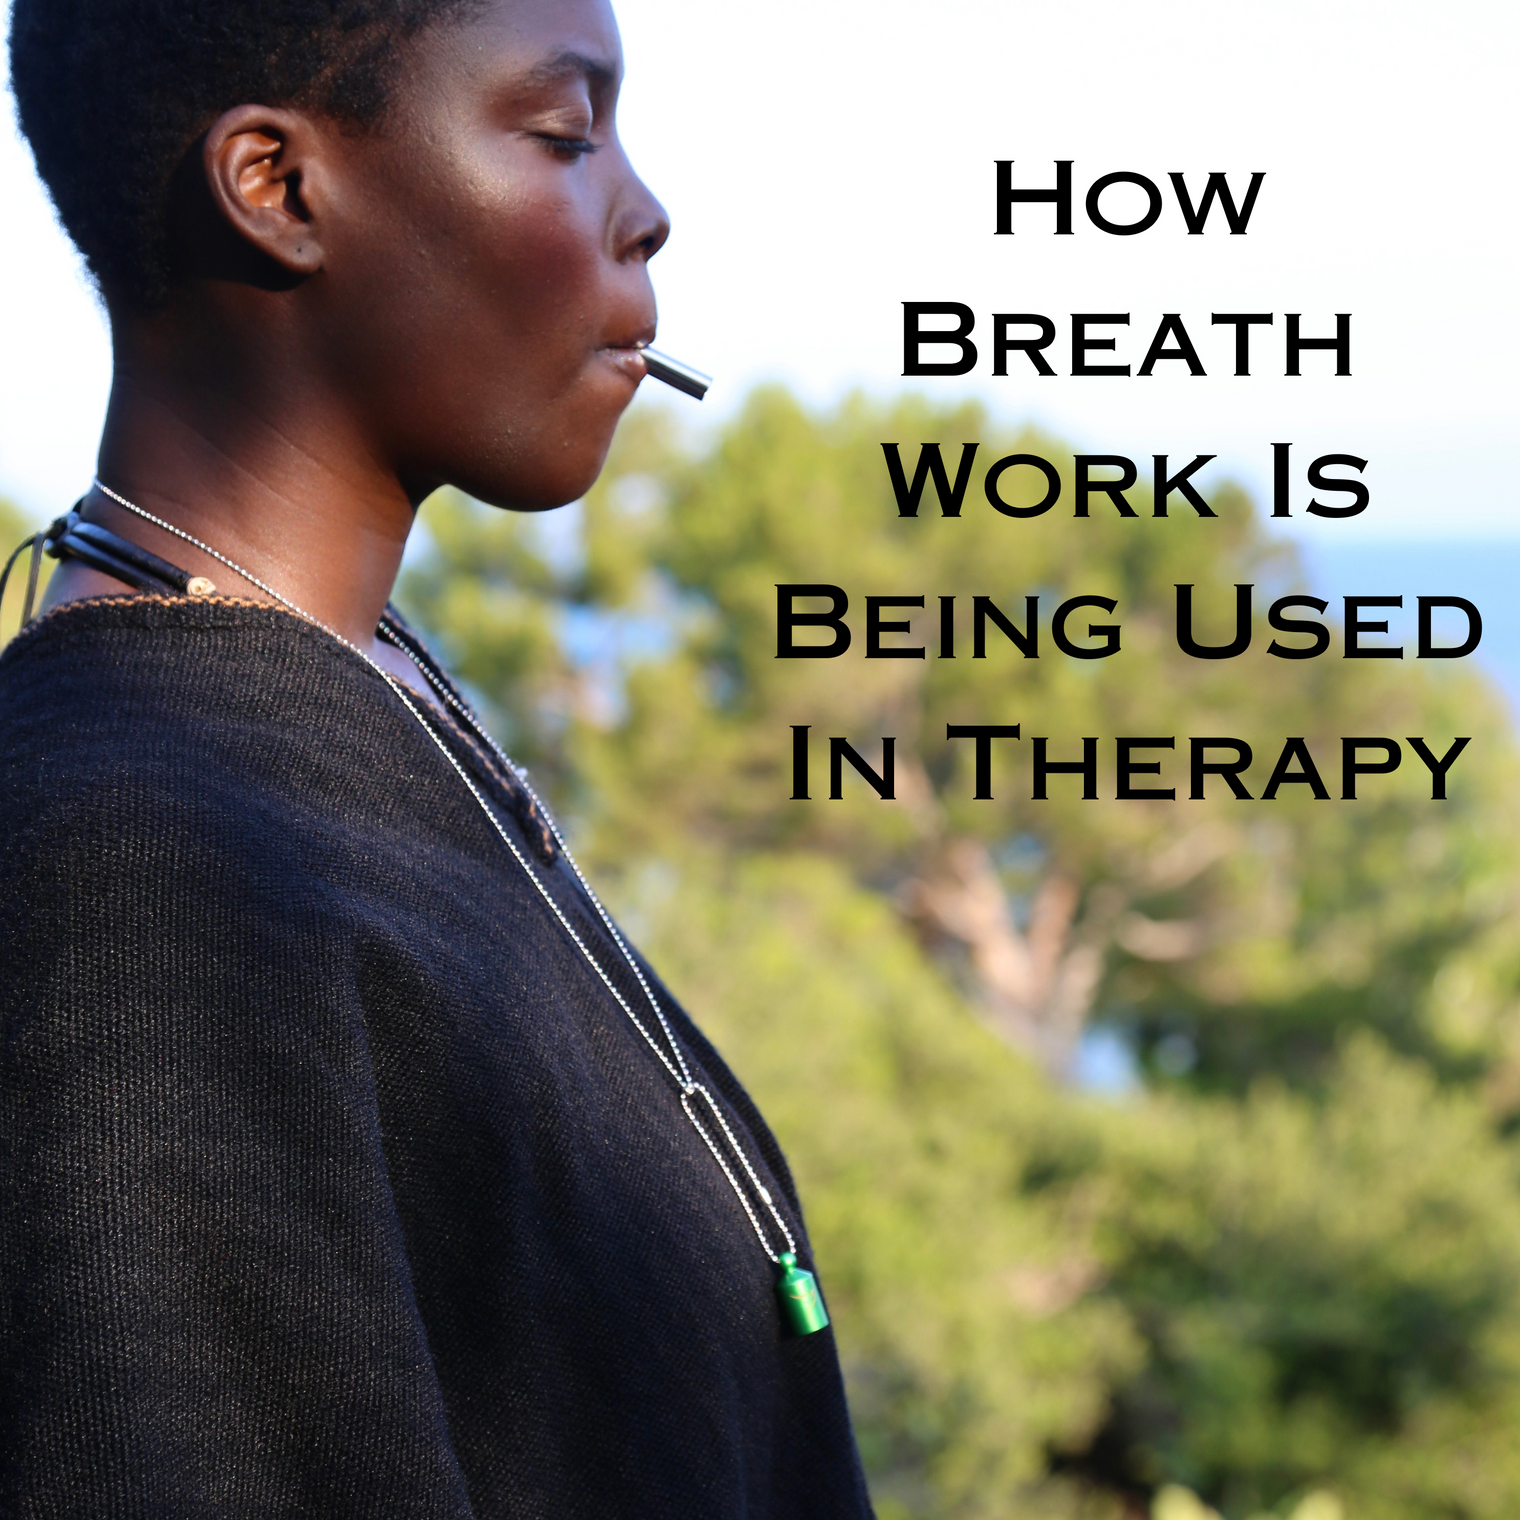 How Breath Work Is Being Used In Therapy